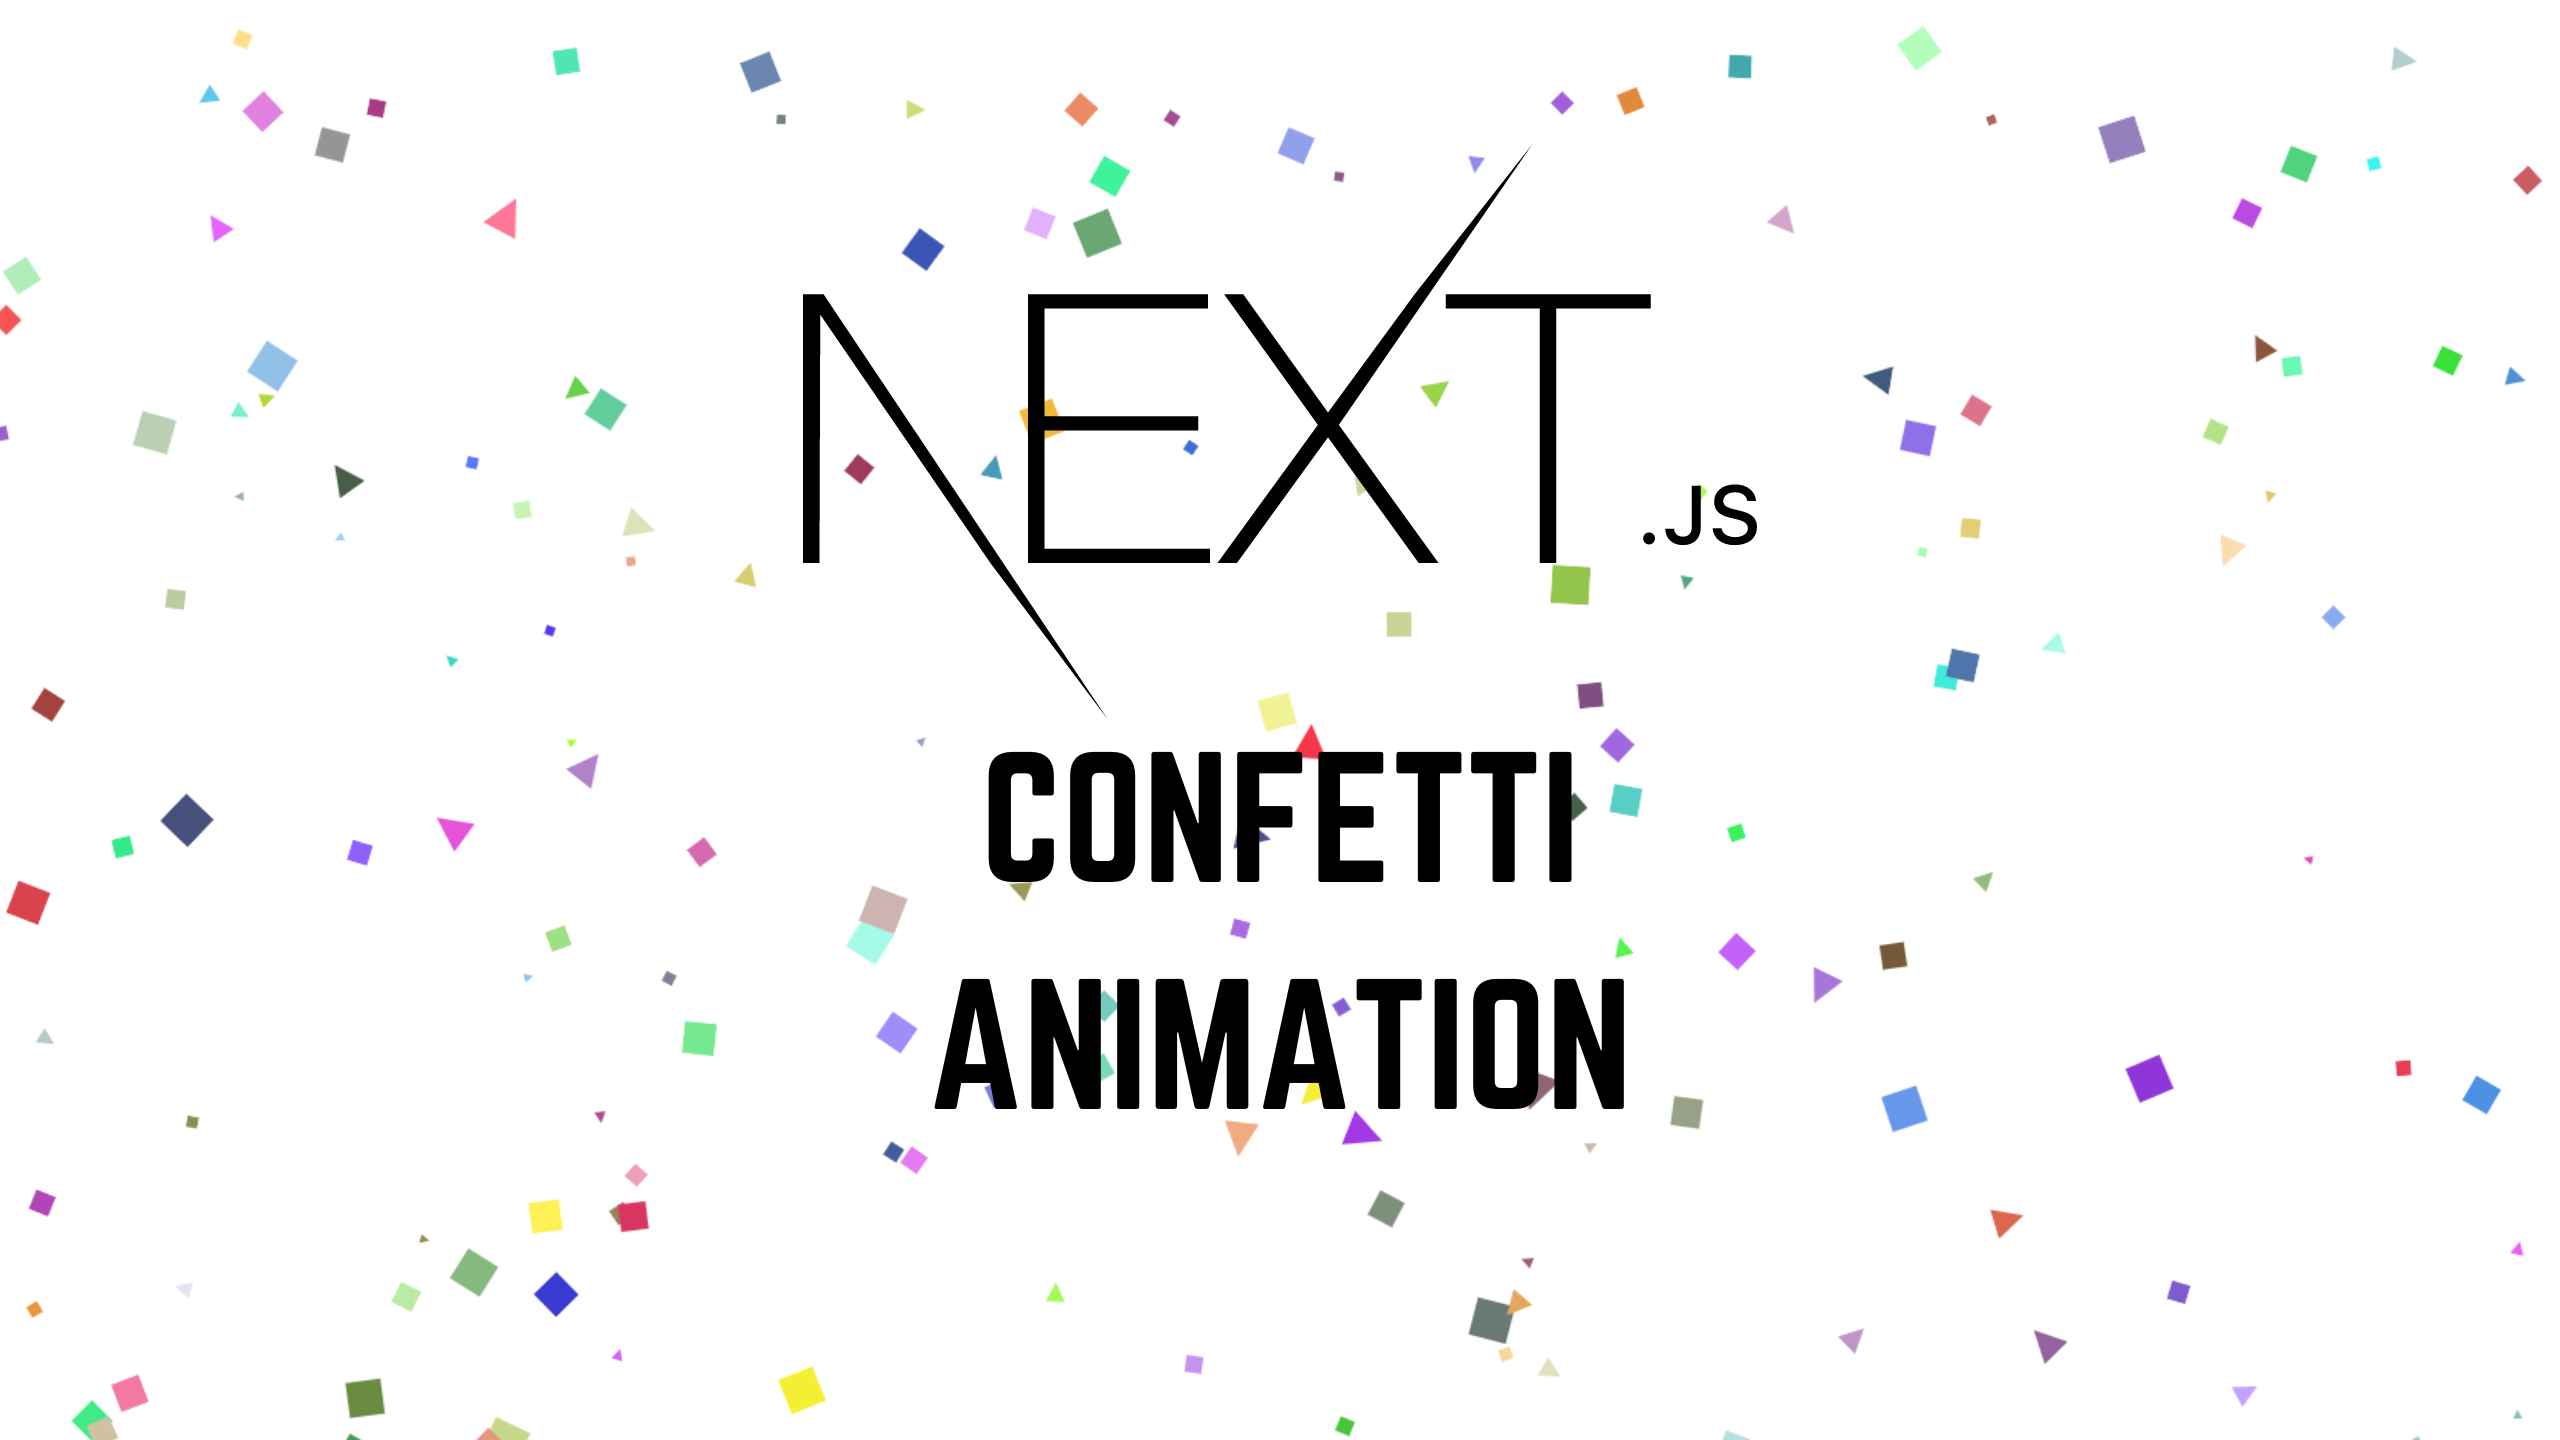 Creating Confetti Animation in Next.js: A Step-by-Step Guide